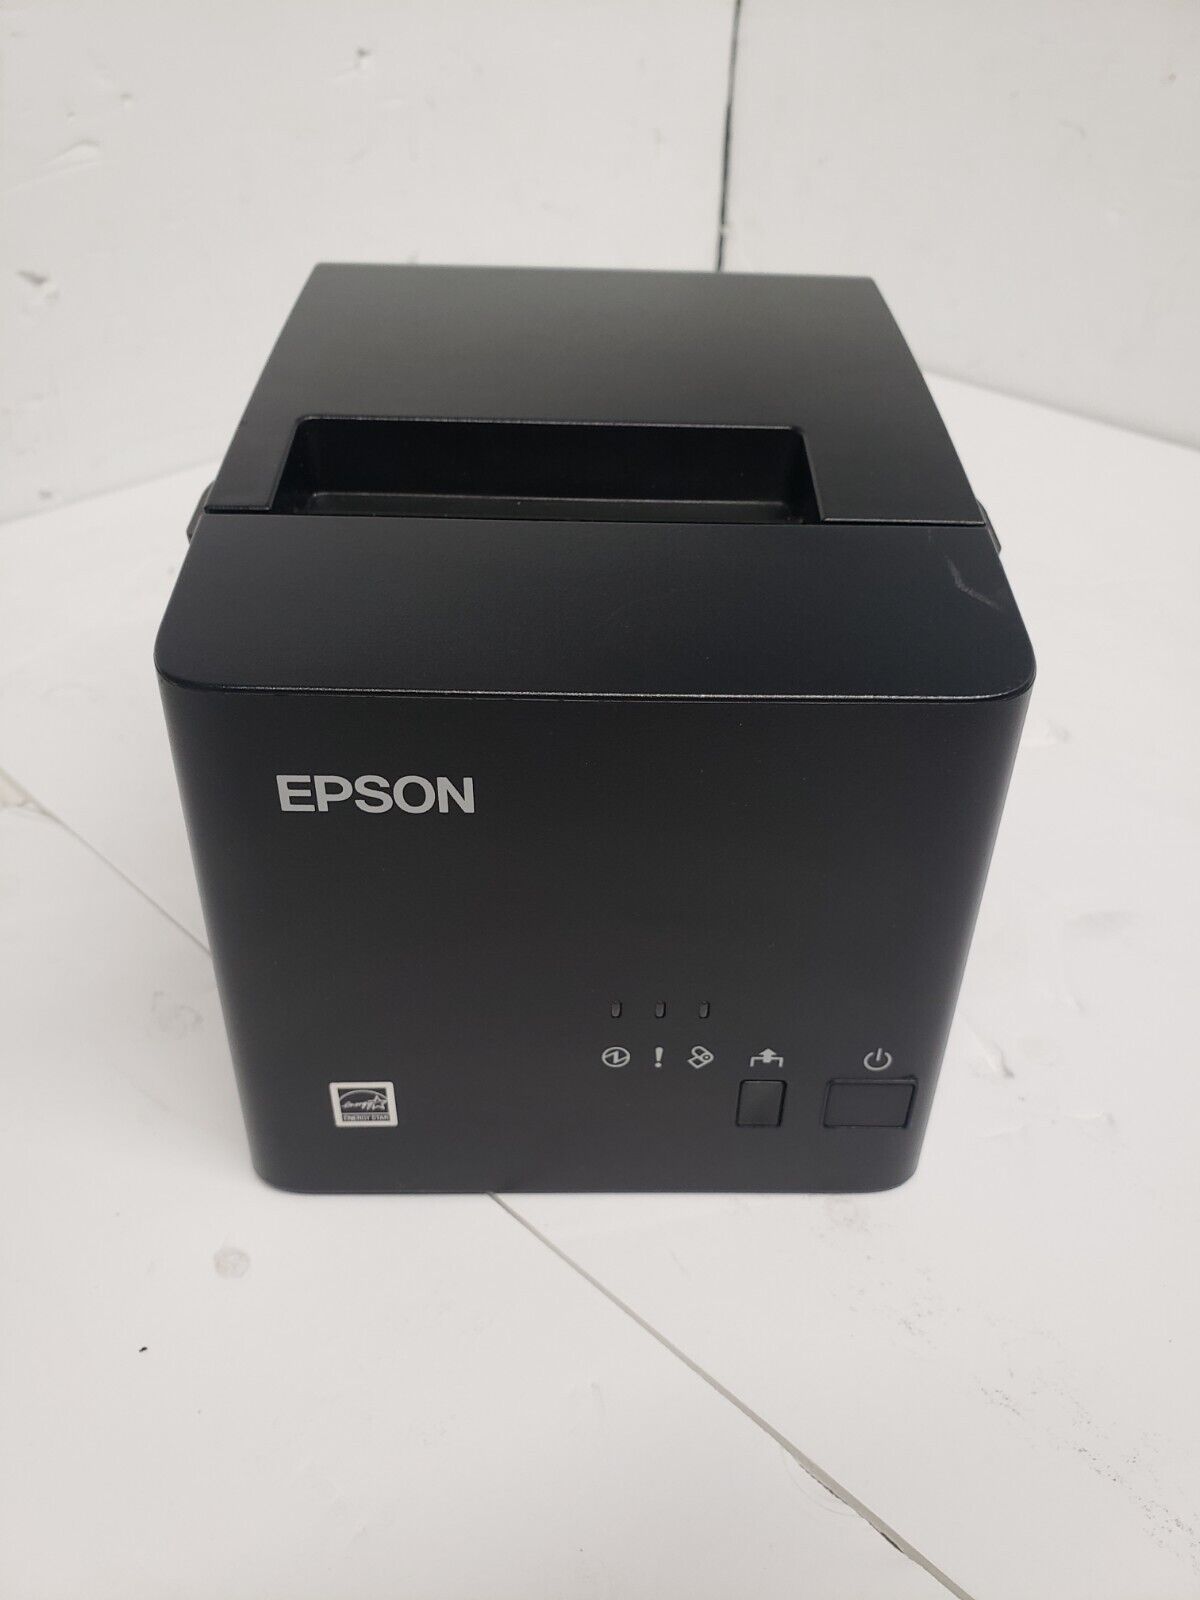 Epson TM-T20IIIL Thermal POS Receipt Printer M352A / NO AC ADAPTER